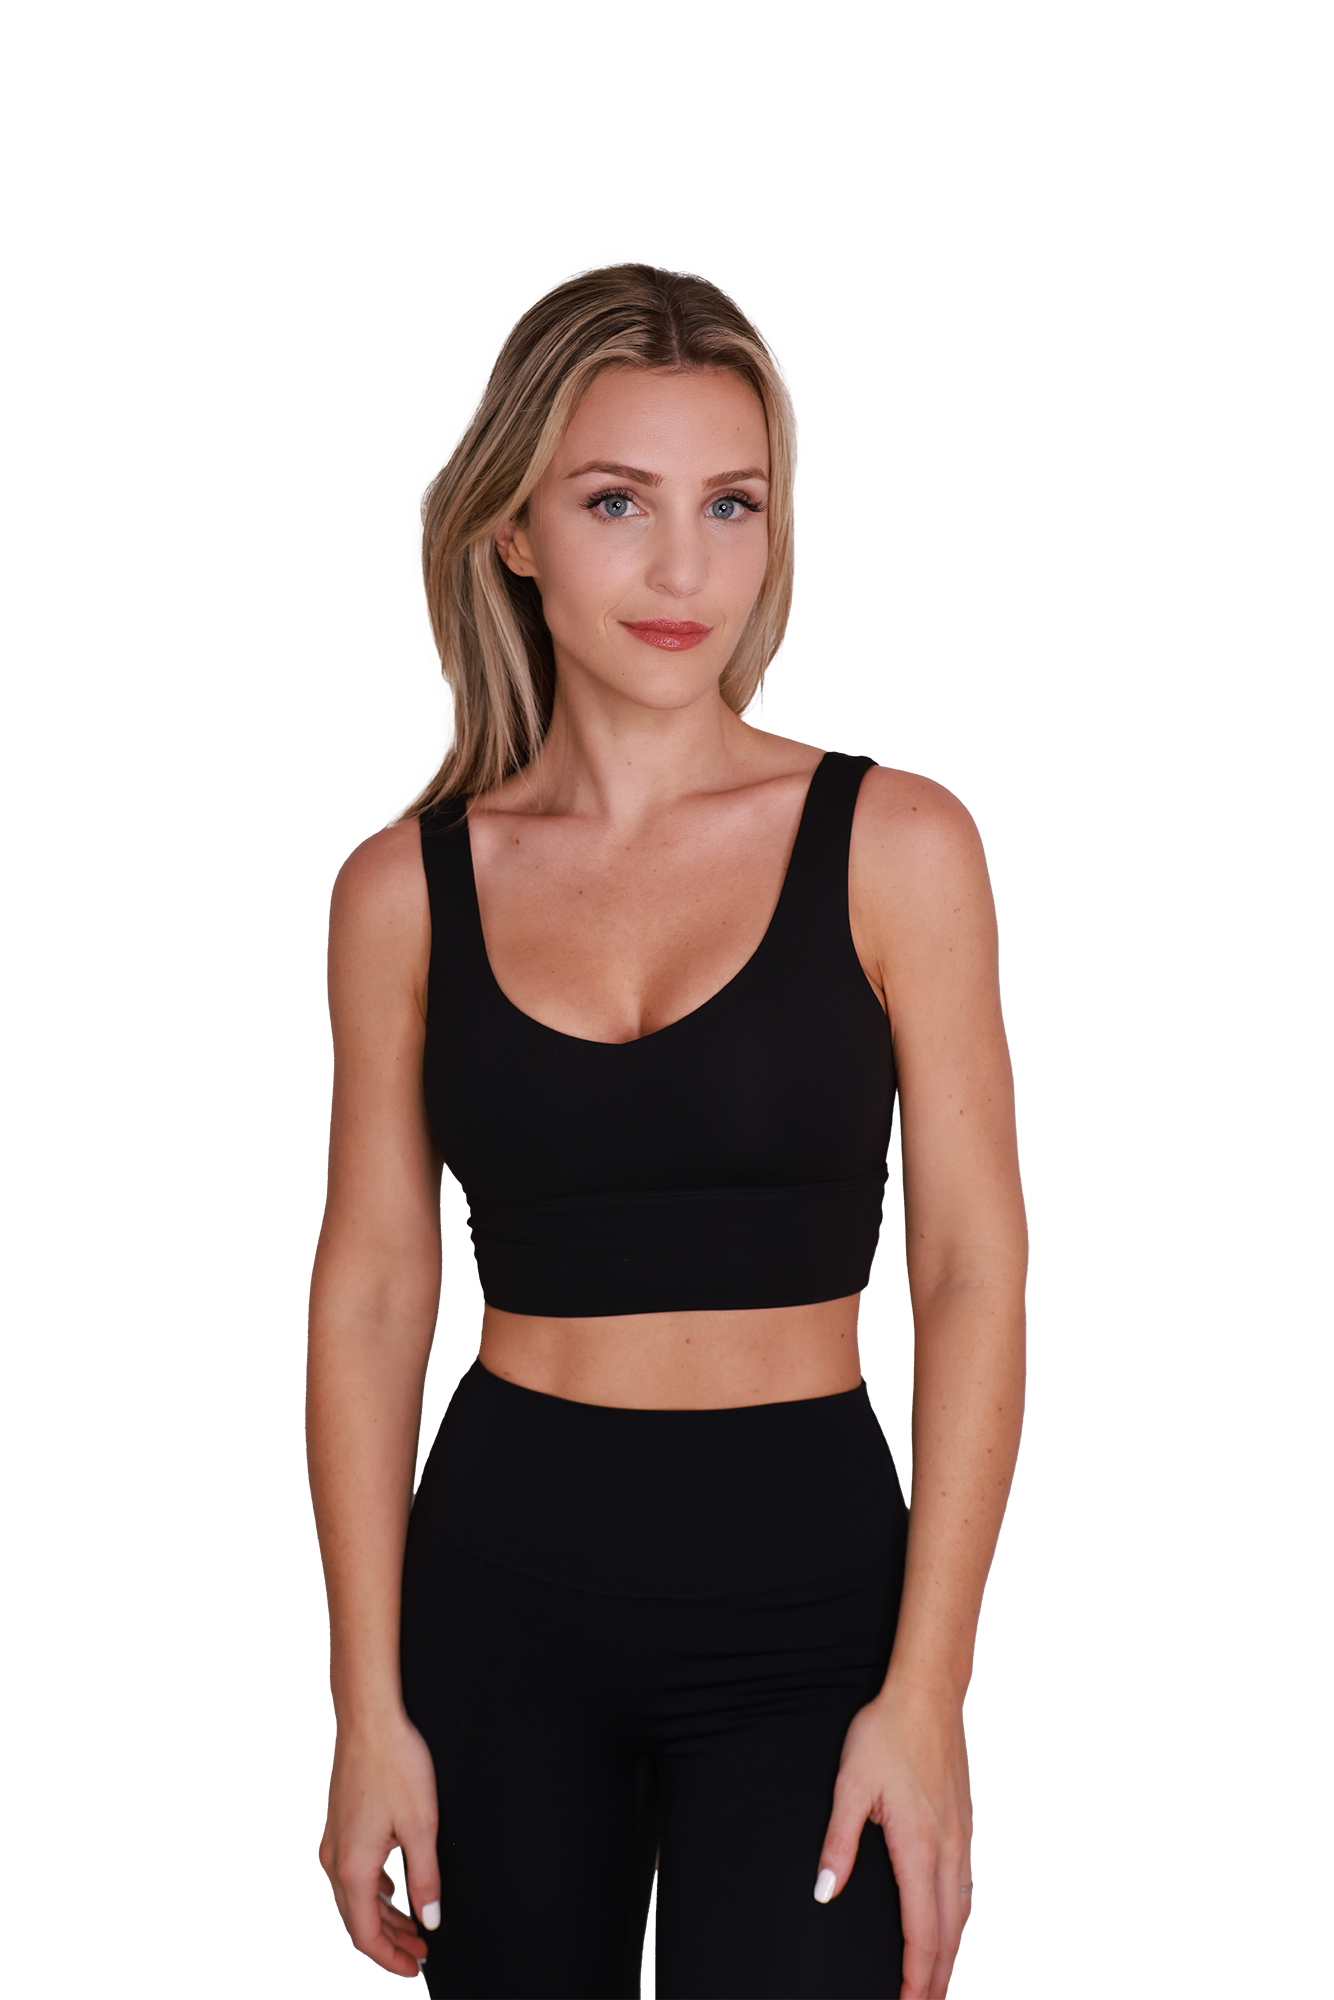 The Intrigue Shelf Bra - perfect for the low cut neck line - 34B